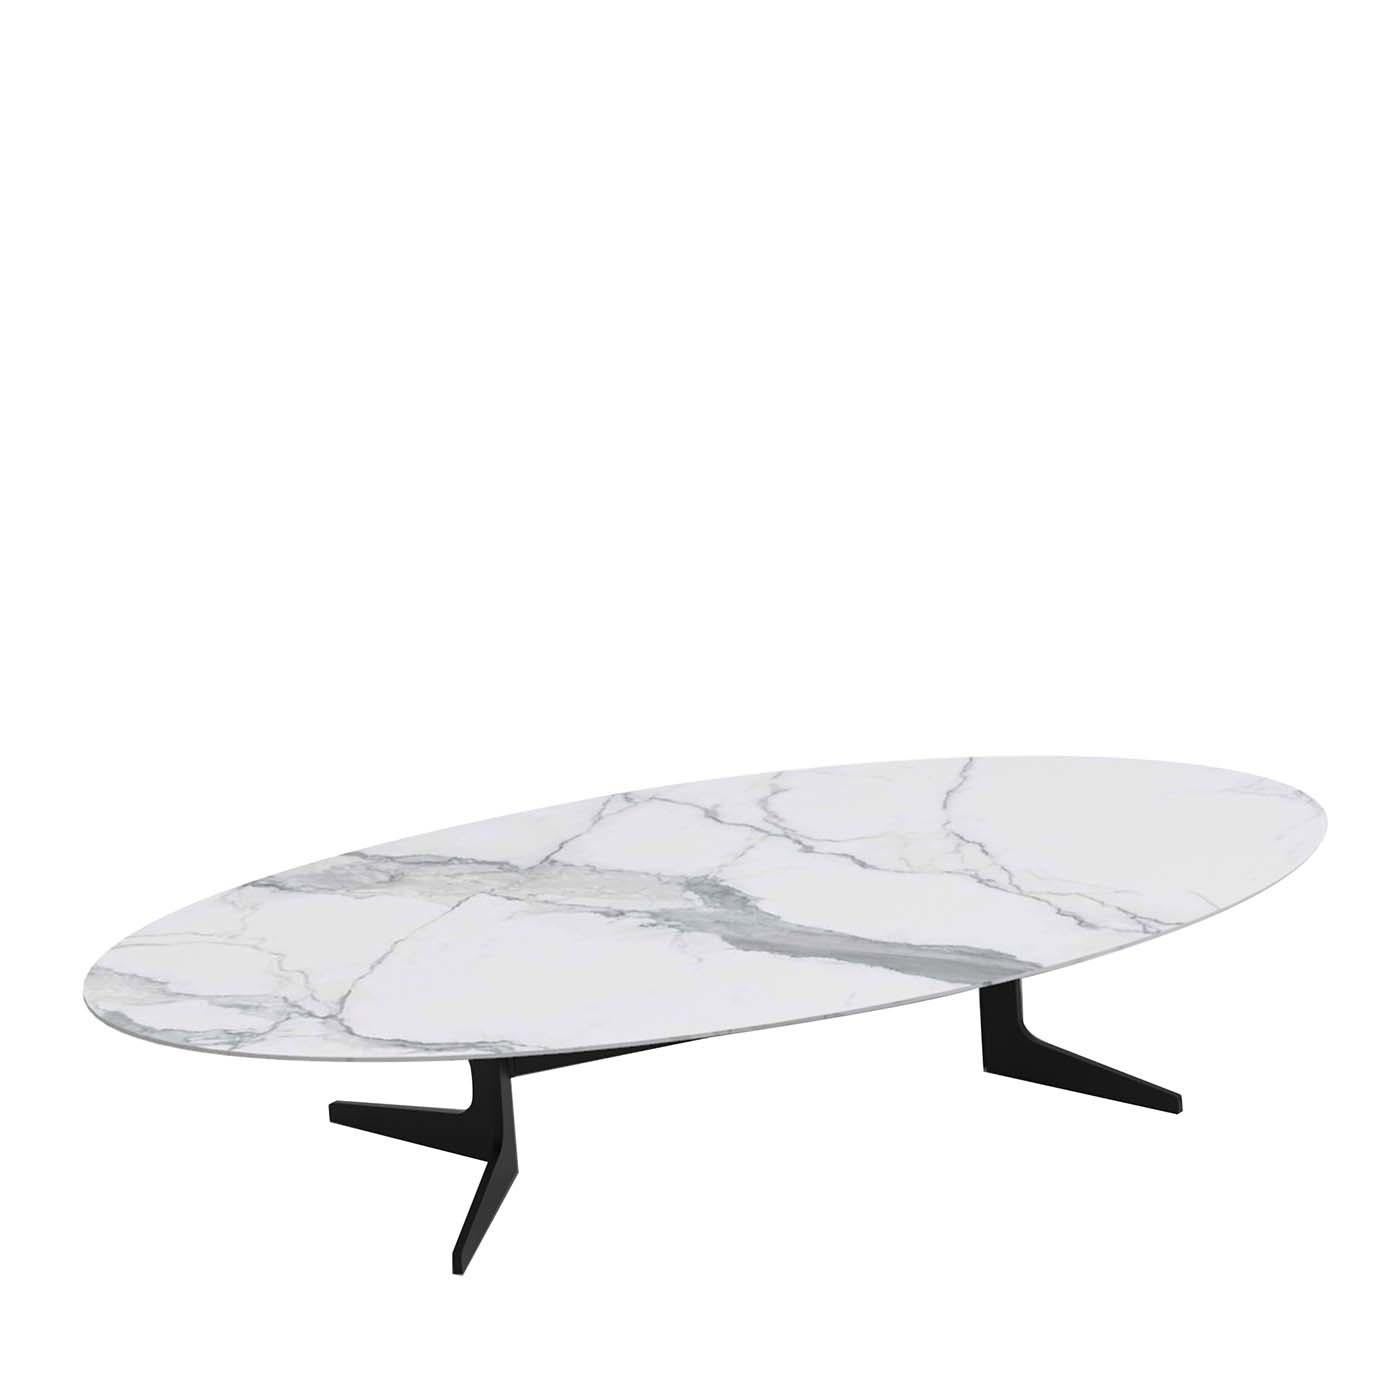 The stunning oval top of white Calacatta marble stands out as statement feature of this refined coffee table. Resting on sturdy metal legs with feet and a matte pewter finish (also available in black nickel or sanded bronze), this superb coffee